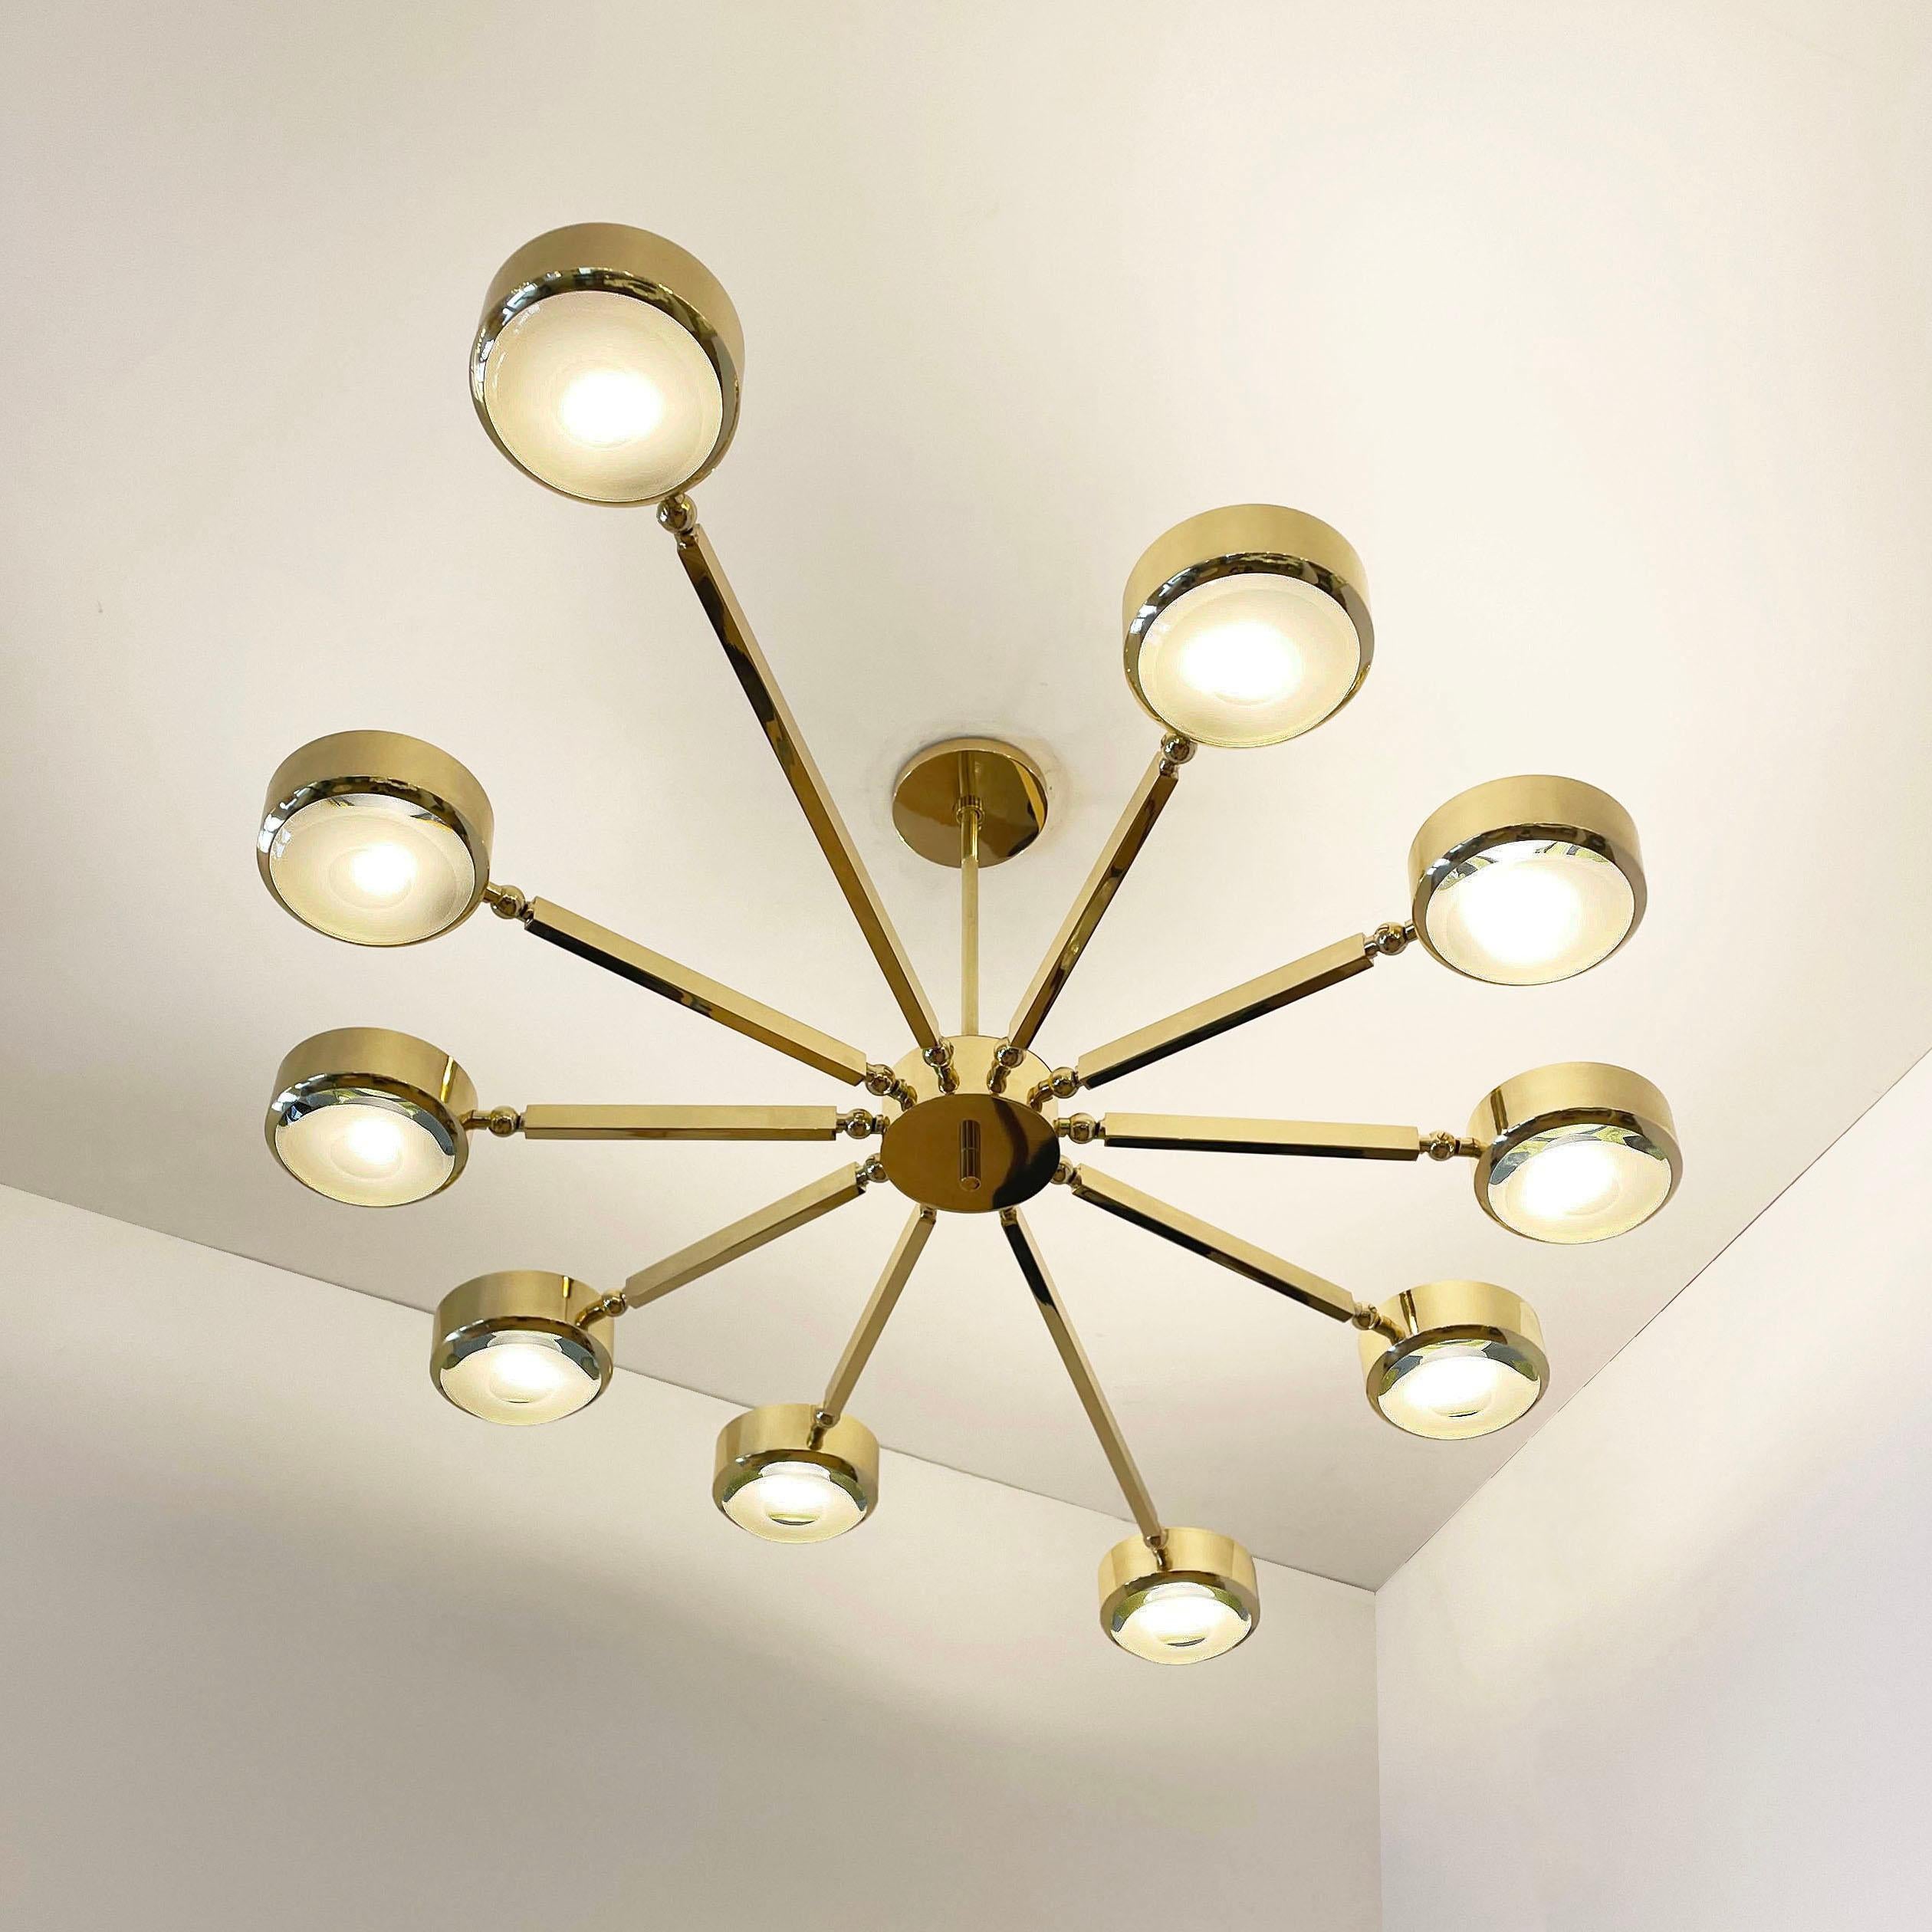 The Oculus ceiling light features an innovative articulating design that allows the ten arms to have a wide range of motion for endless configurations. The brass constructed frame can be flush mounted or installed on a stem and can be fitted with